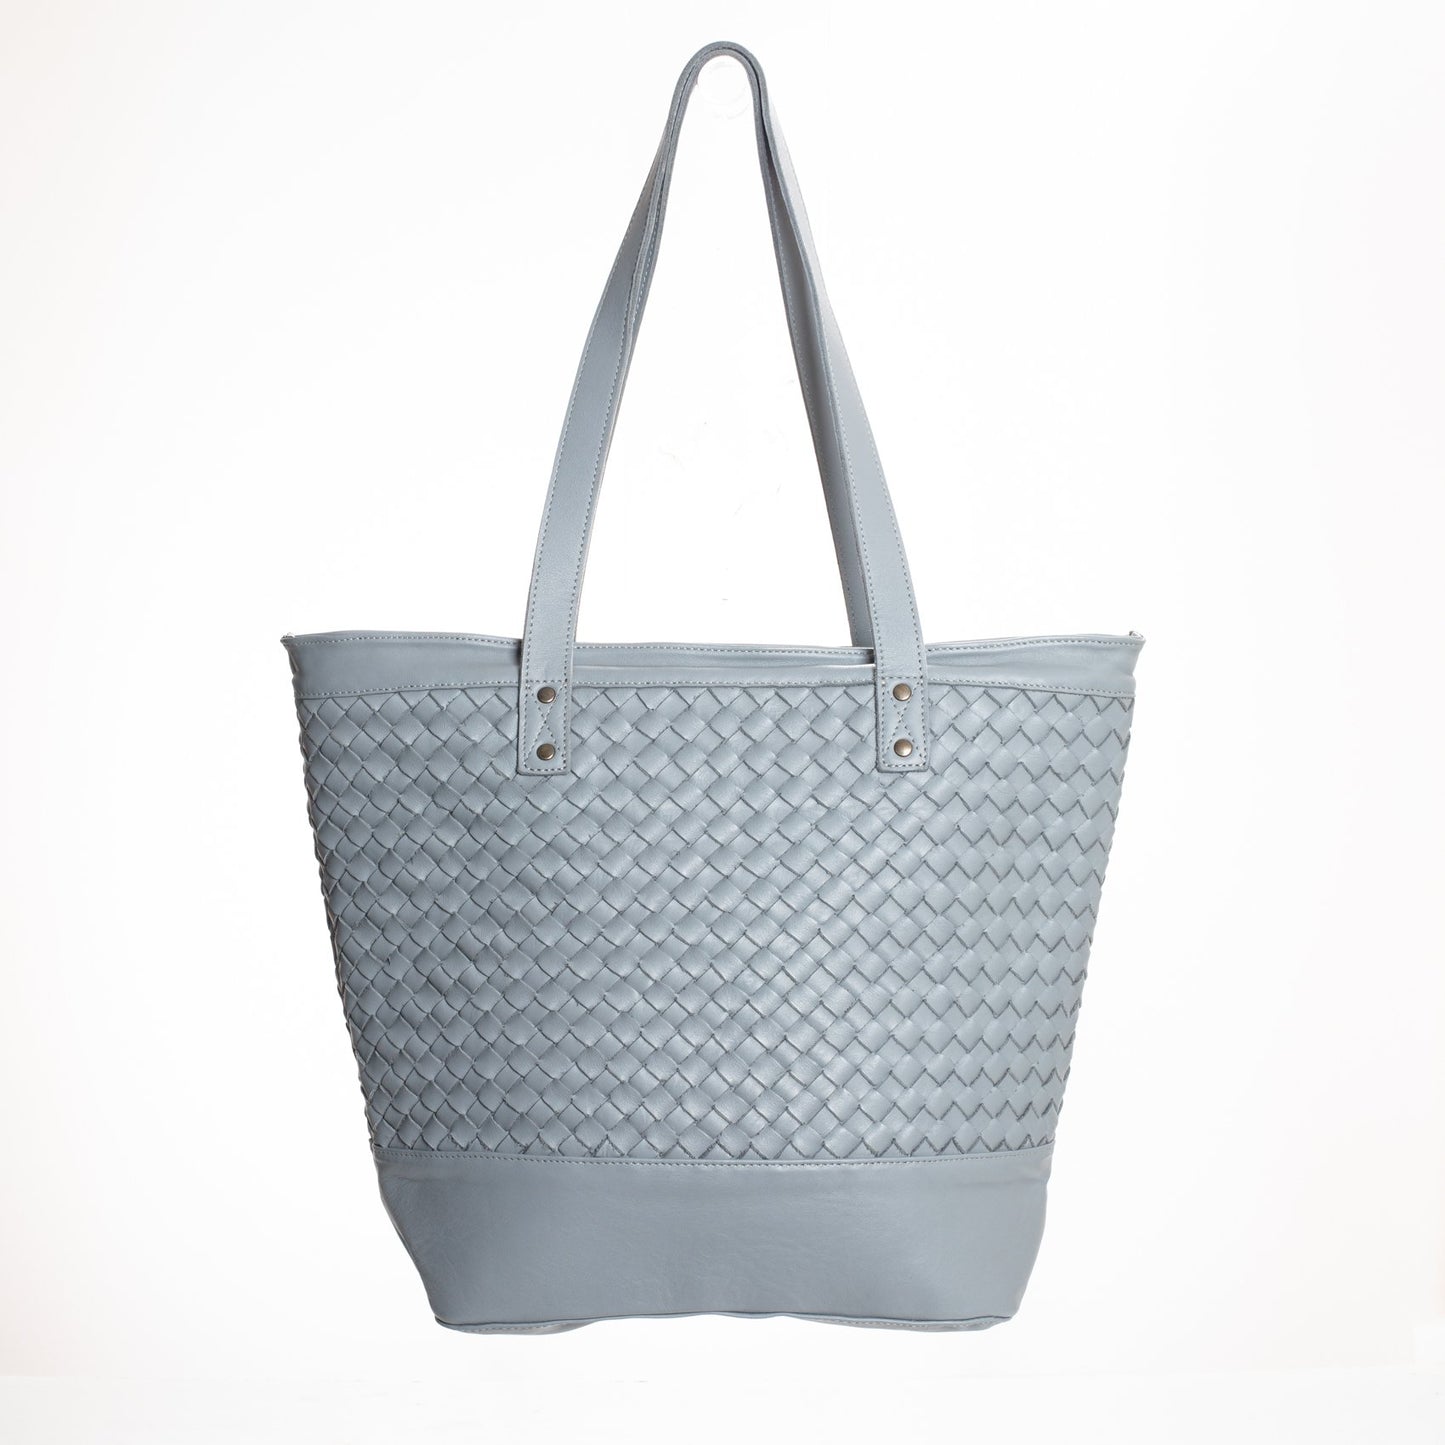 HANDWOVEN CESTA TOTE - FULL LEATHER COLLECTION - GREY